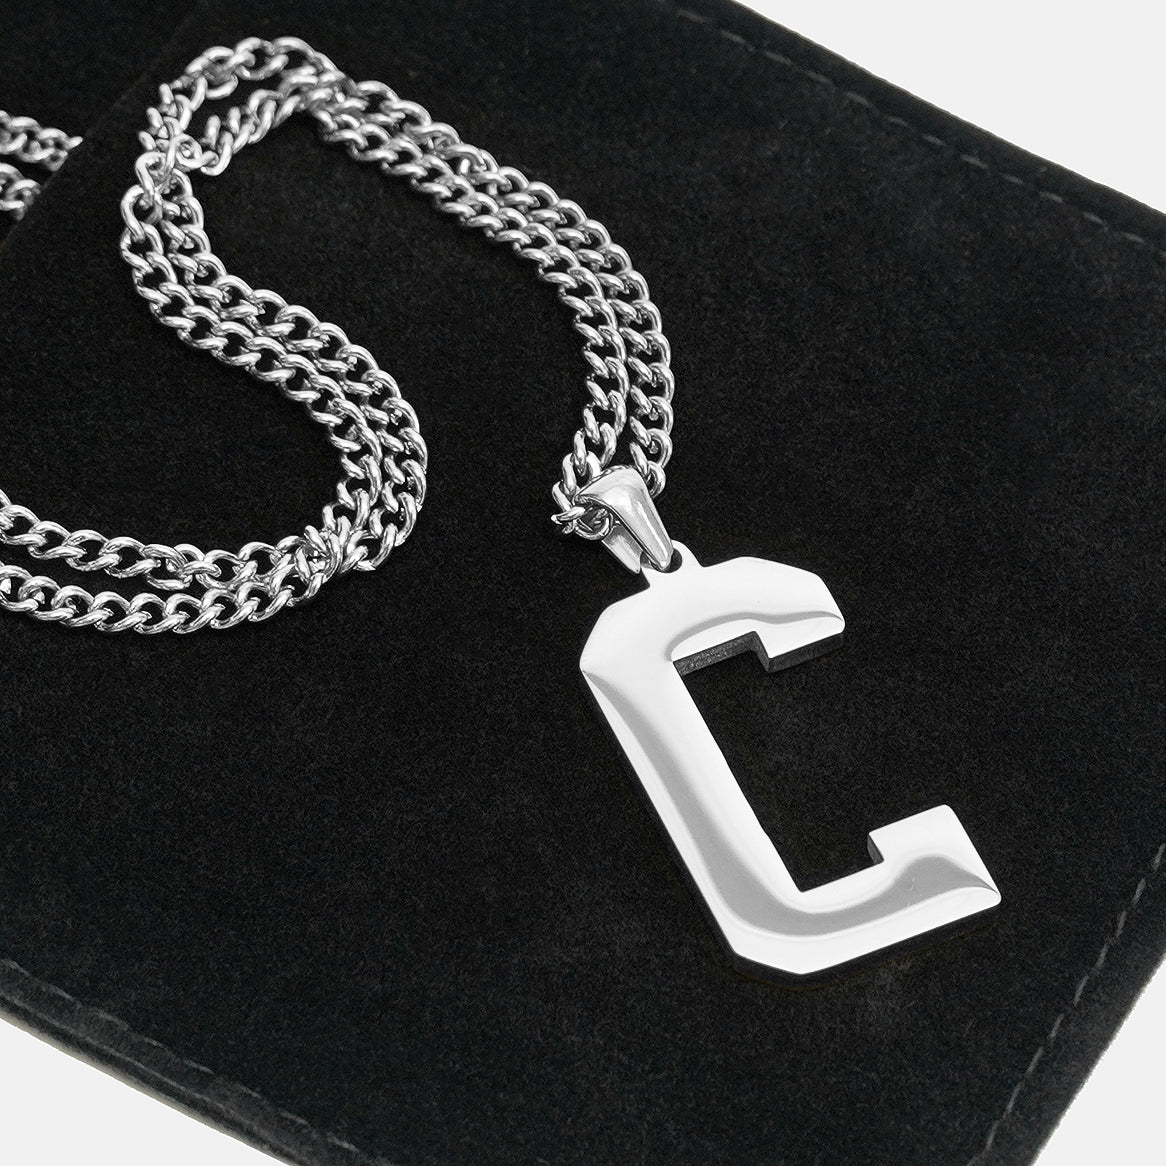 C Letter Pendant with Chain Kids Necklace - Stainless Steel